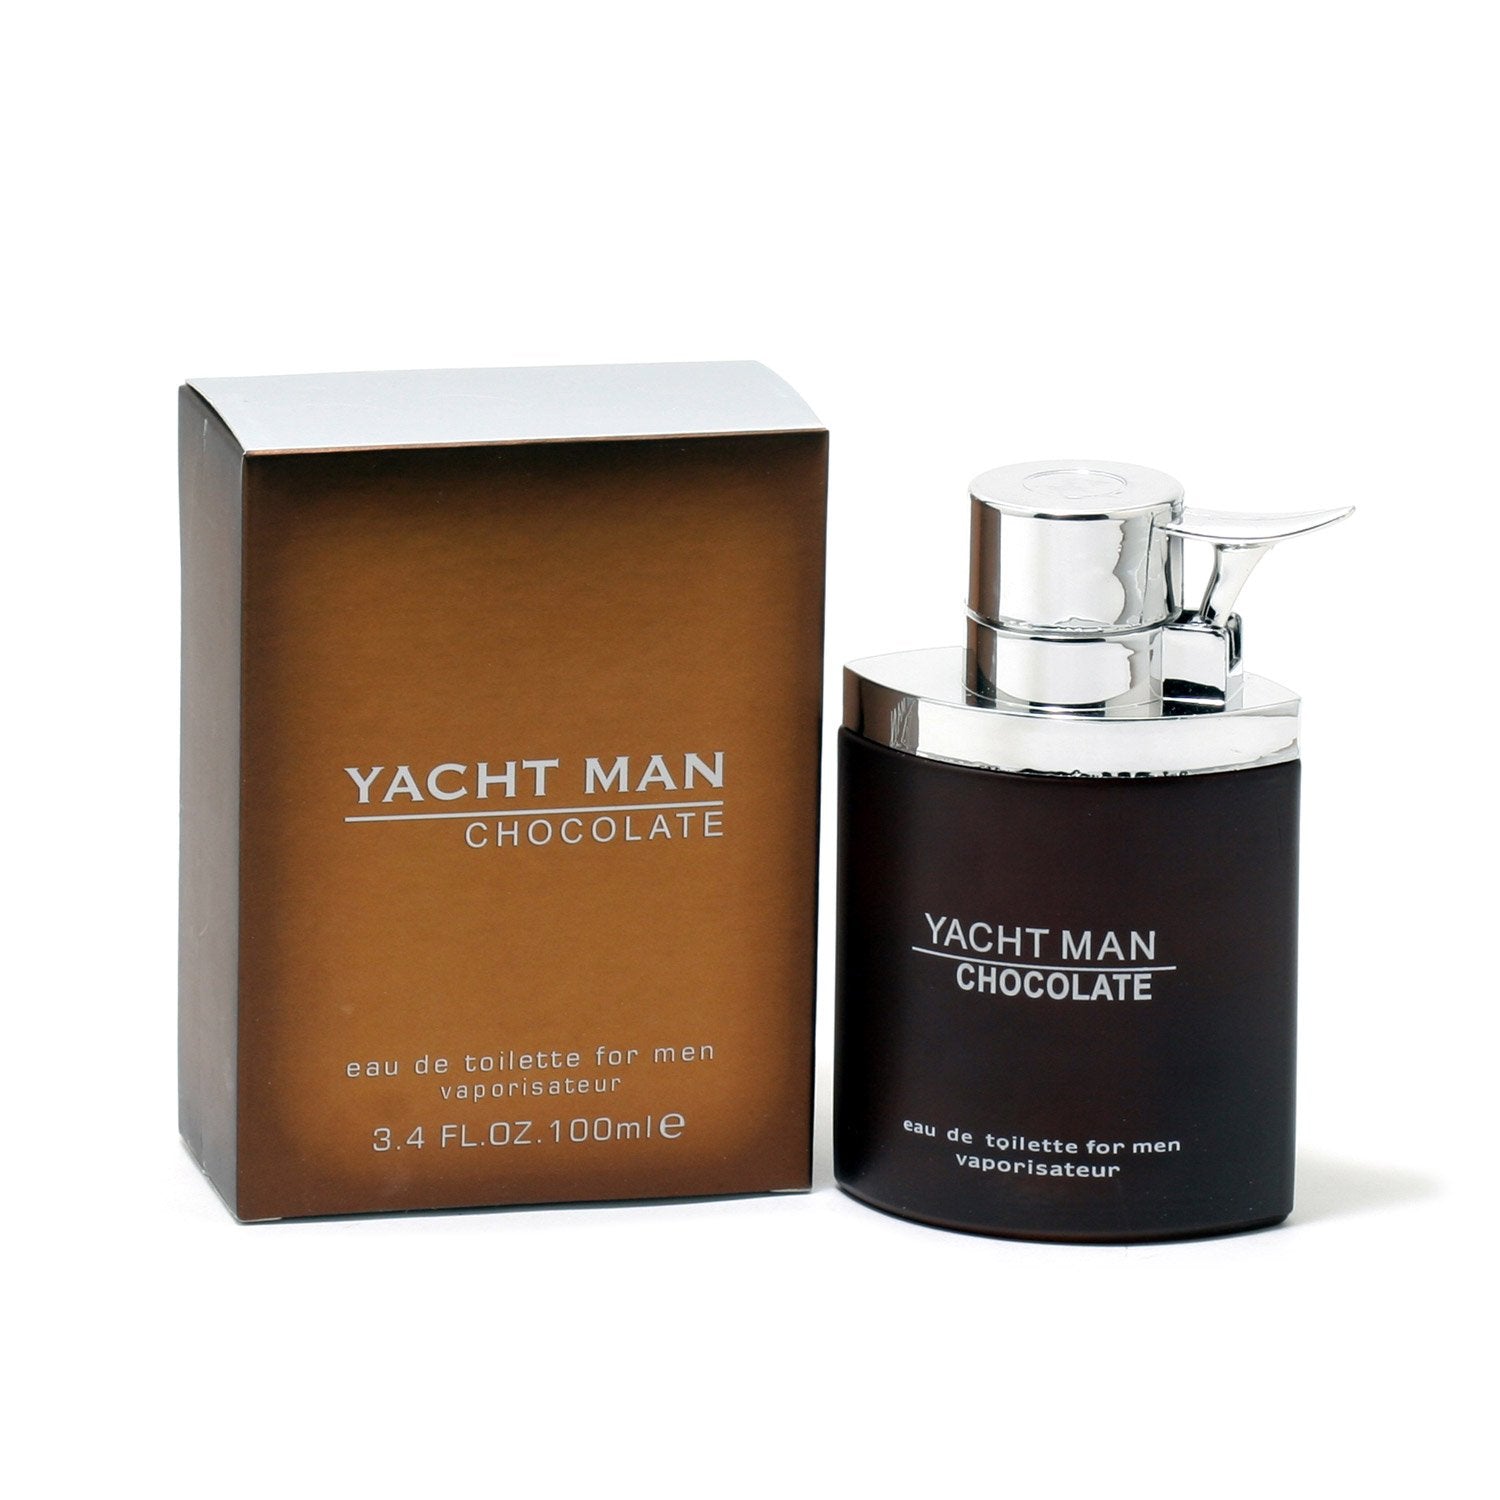 yacht man perfume made in which country